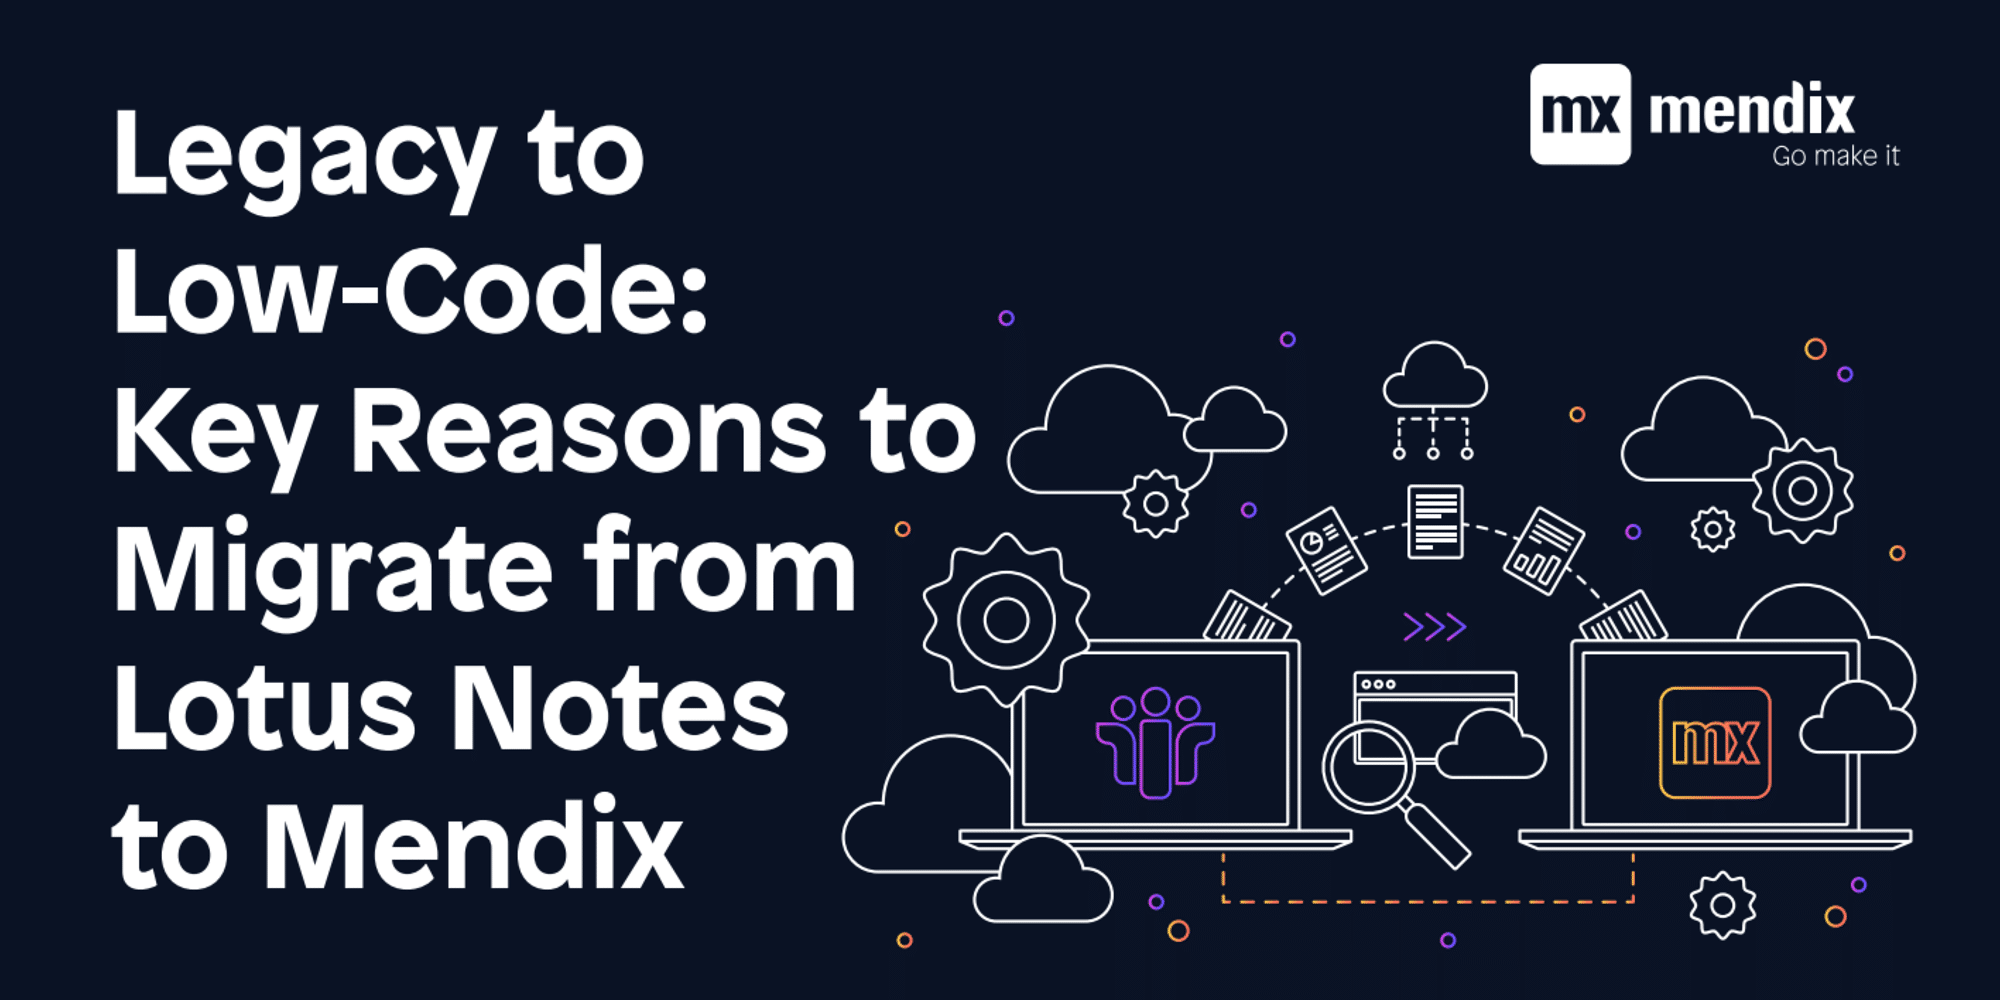 Legacy to Low-Code Key Reasons to Migrate from Lotus Notes to Mendix